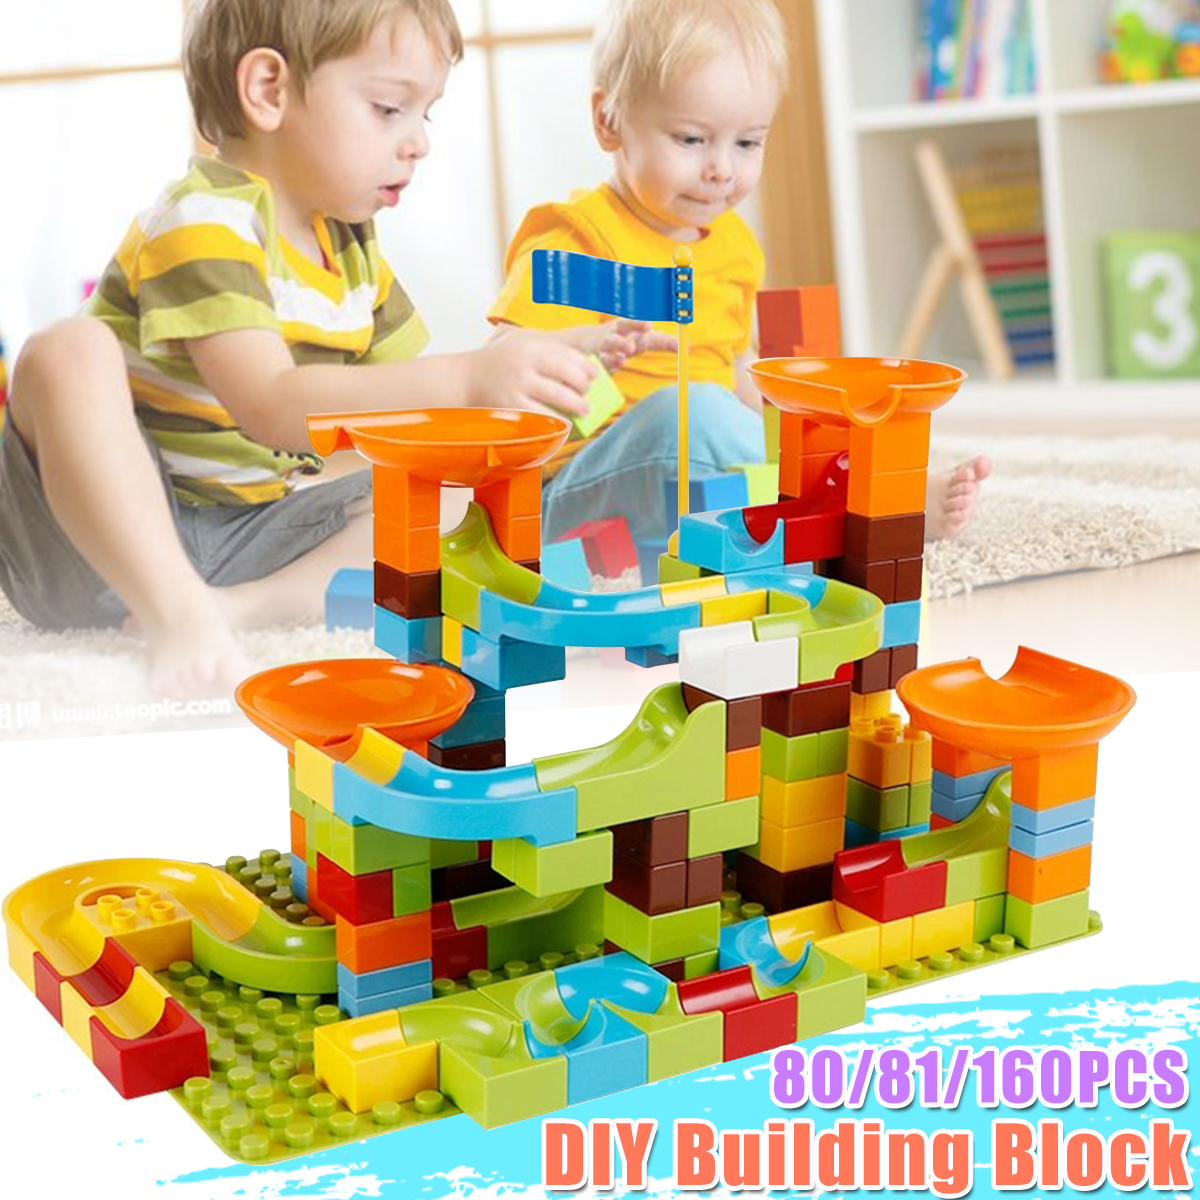 8081160Pcs-DIY-Assembly-Kids-Game-Play-Building-Blocks-Toys-for-Kids-Gift-1678176-2